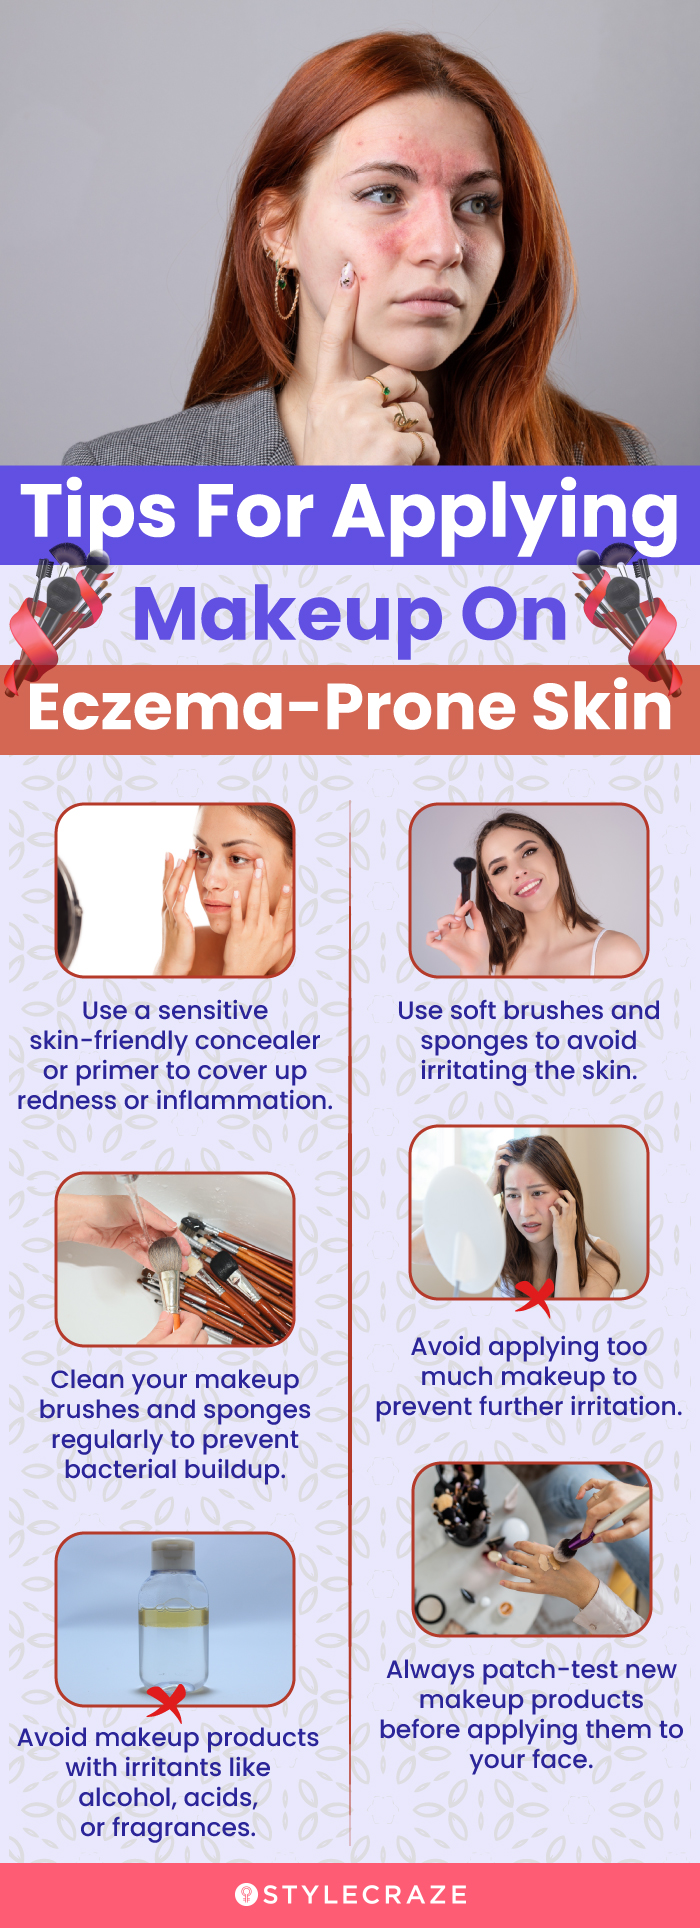 Tips For Applying Makeup On Eczema-Prone Skin (infographic)